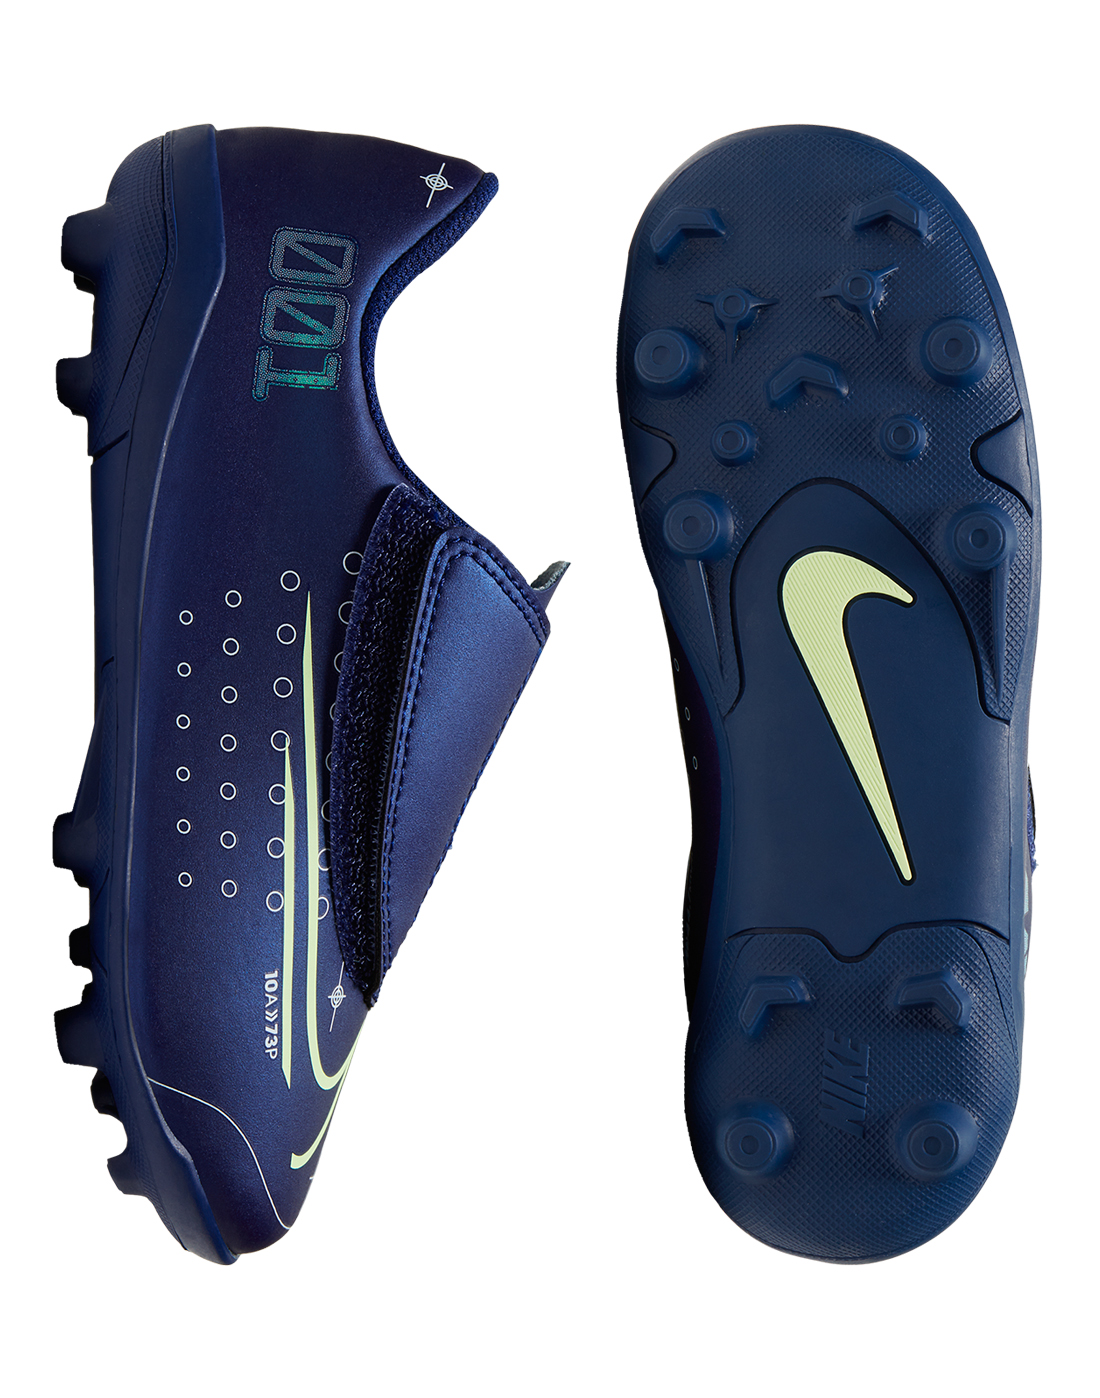 Nike KIDS MERCURIAL VAPOR 13 PS MDS MG - Navy Life Style Sports